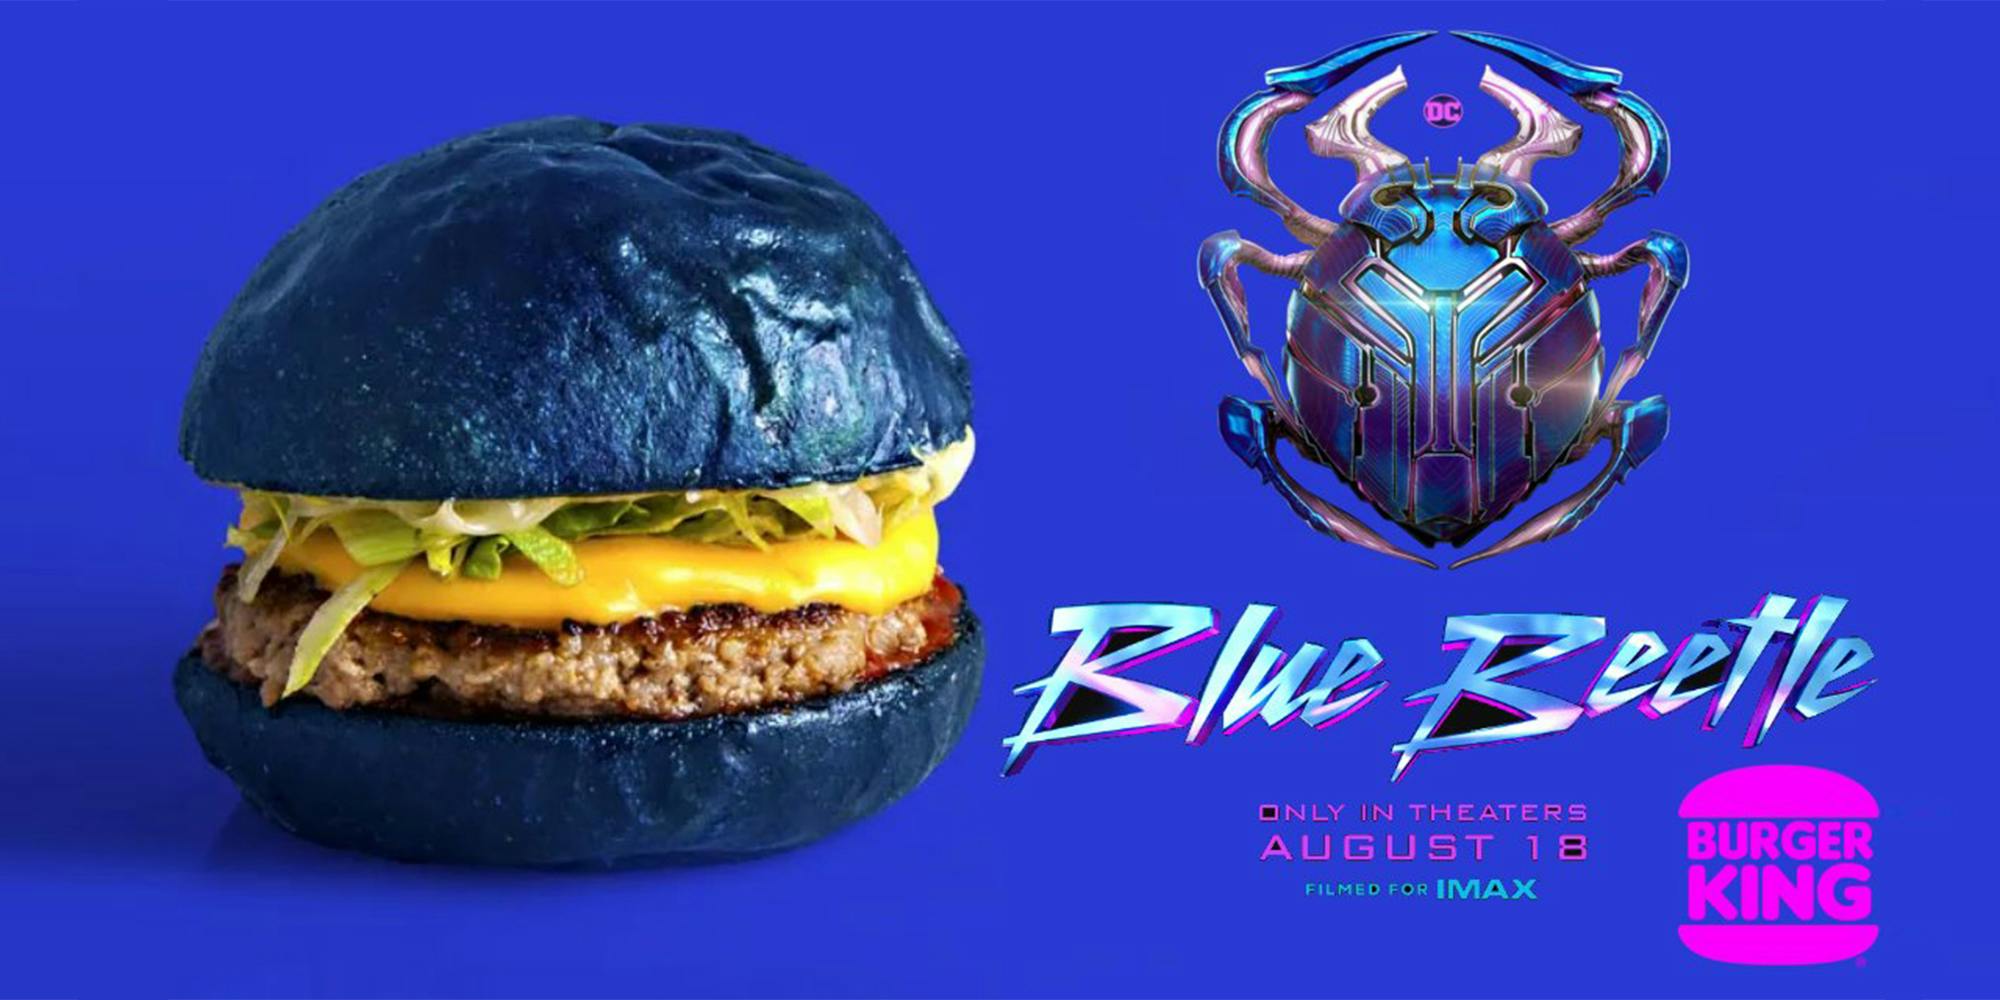 fake "blue beetle" and burger king crossover